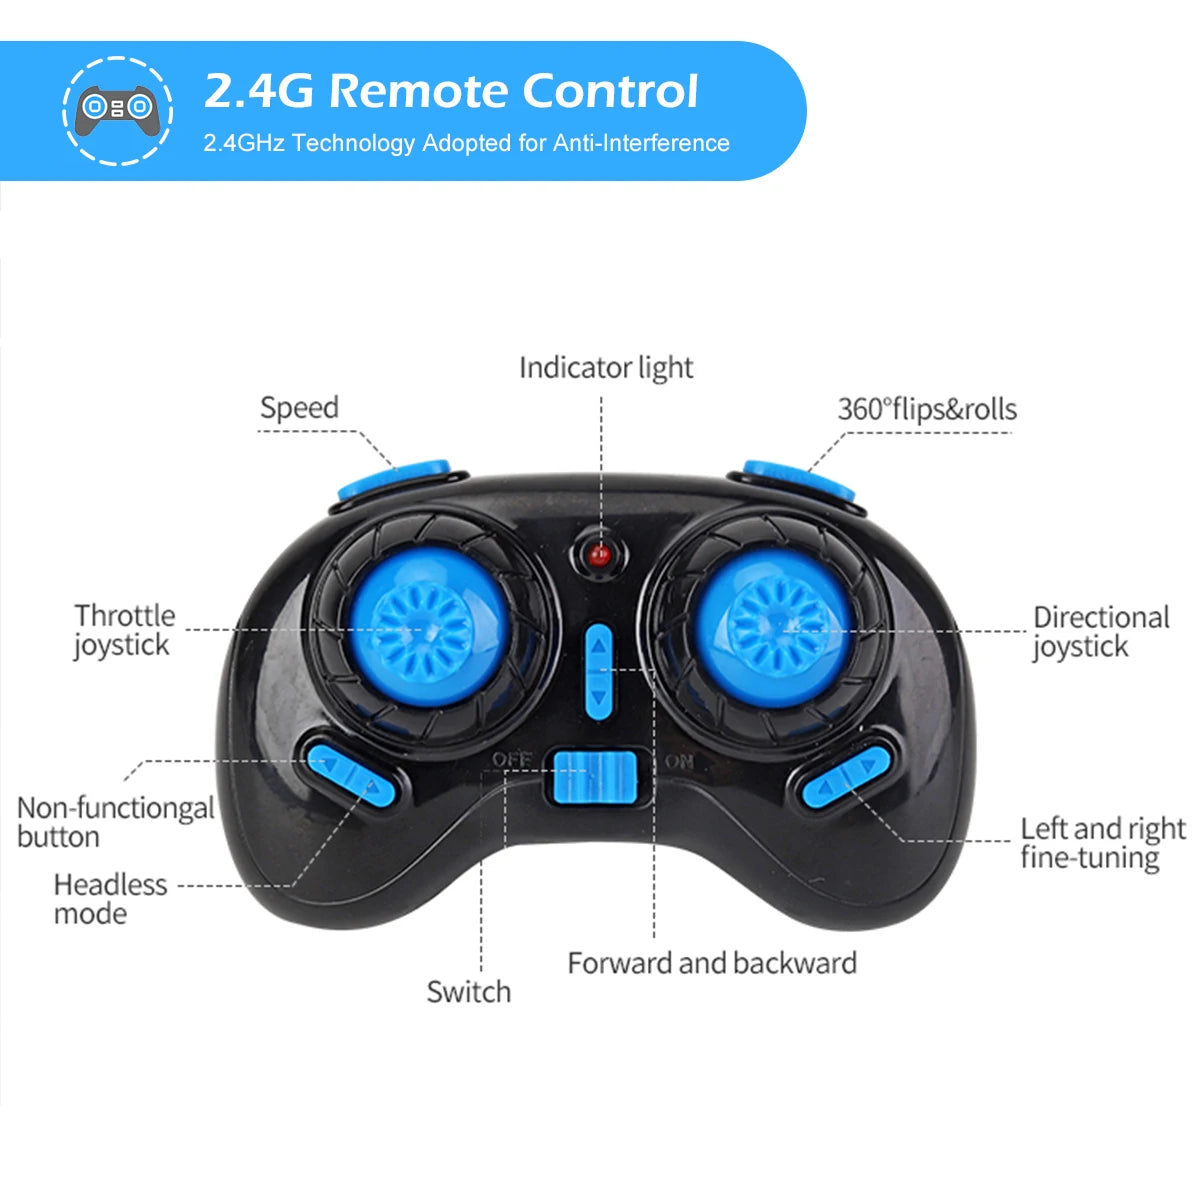 JJRC H36F RC Mini Drone, 2.4g remote control technology adopted for anti-interference indicator light